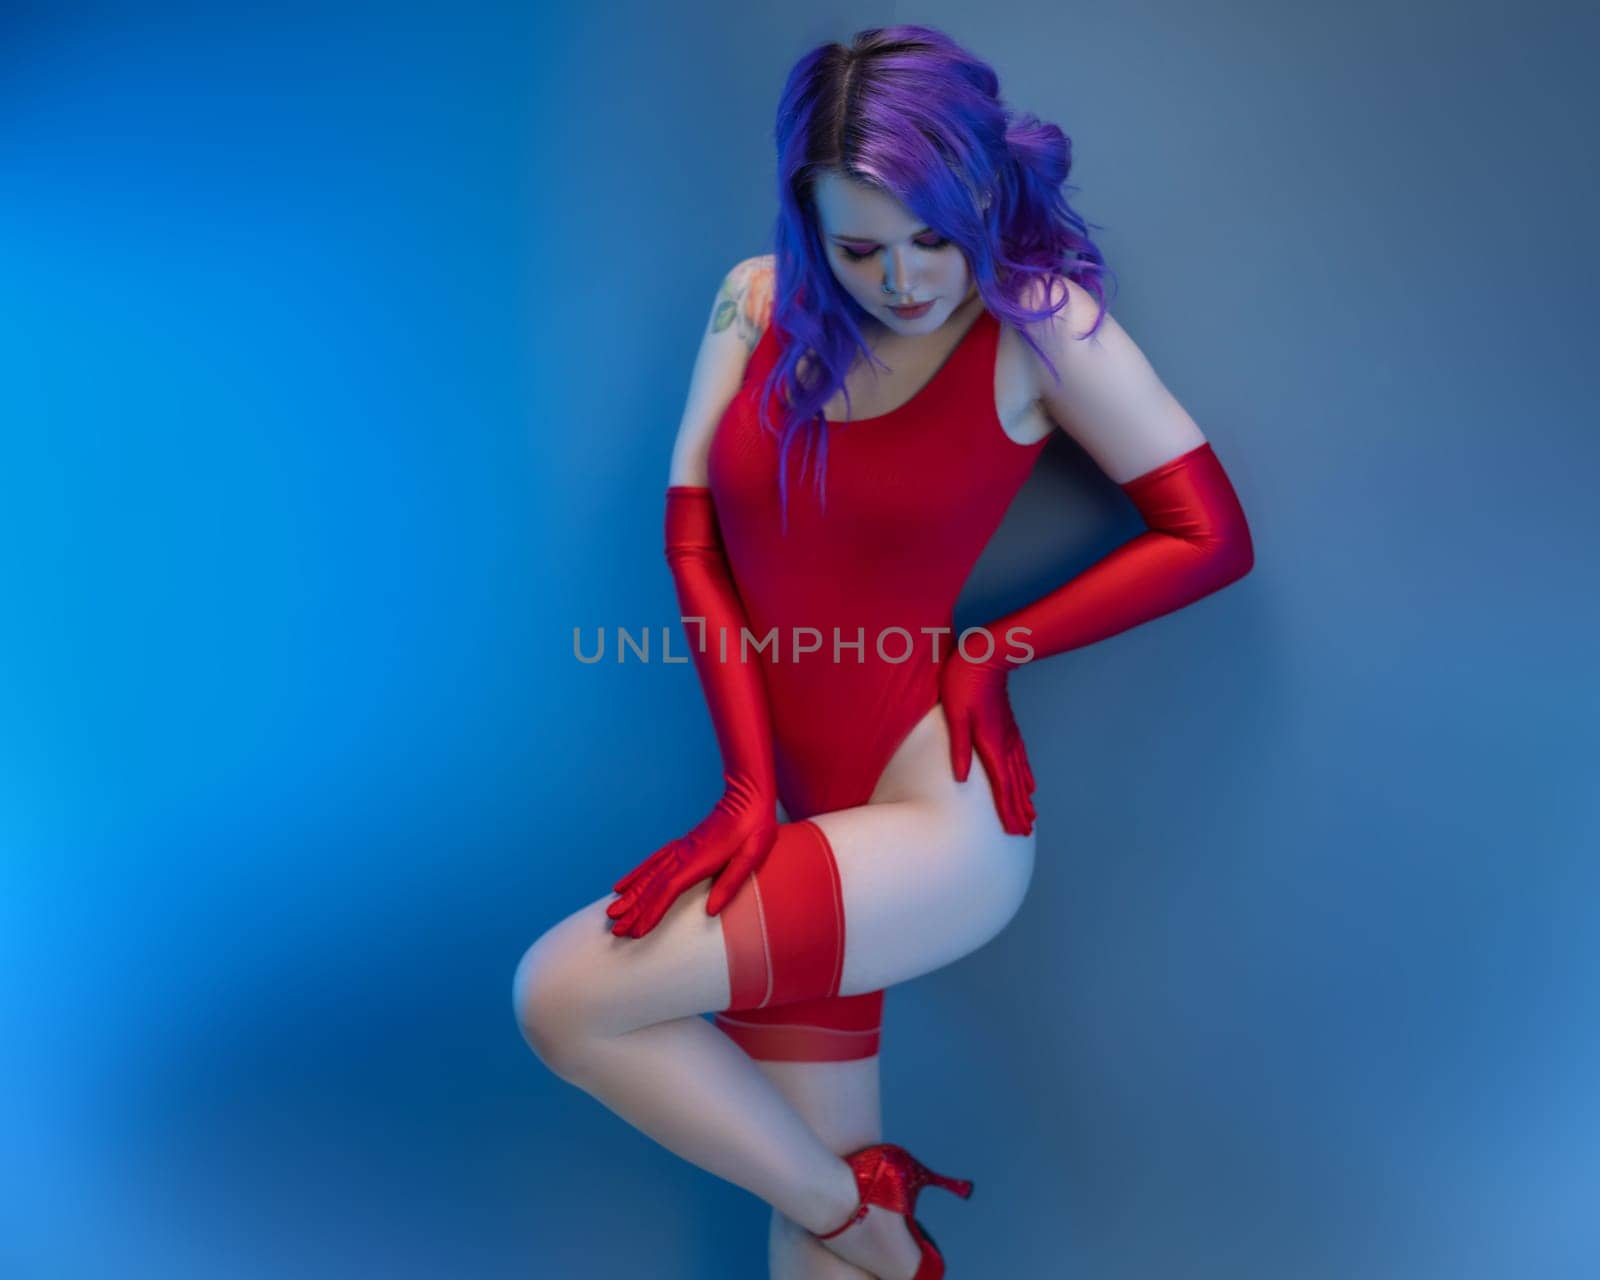 the sexy girl in red bodysuit stockings and red gloves poses erotically against the background